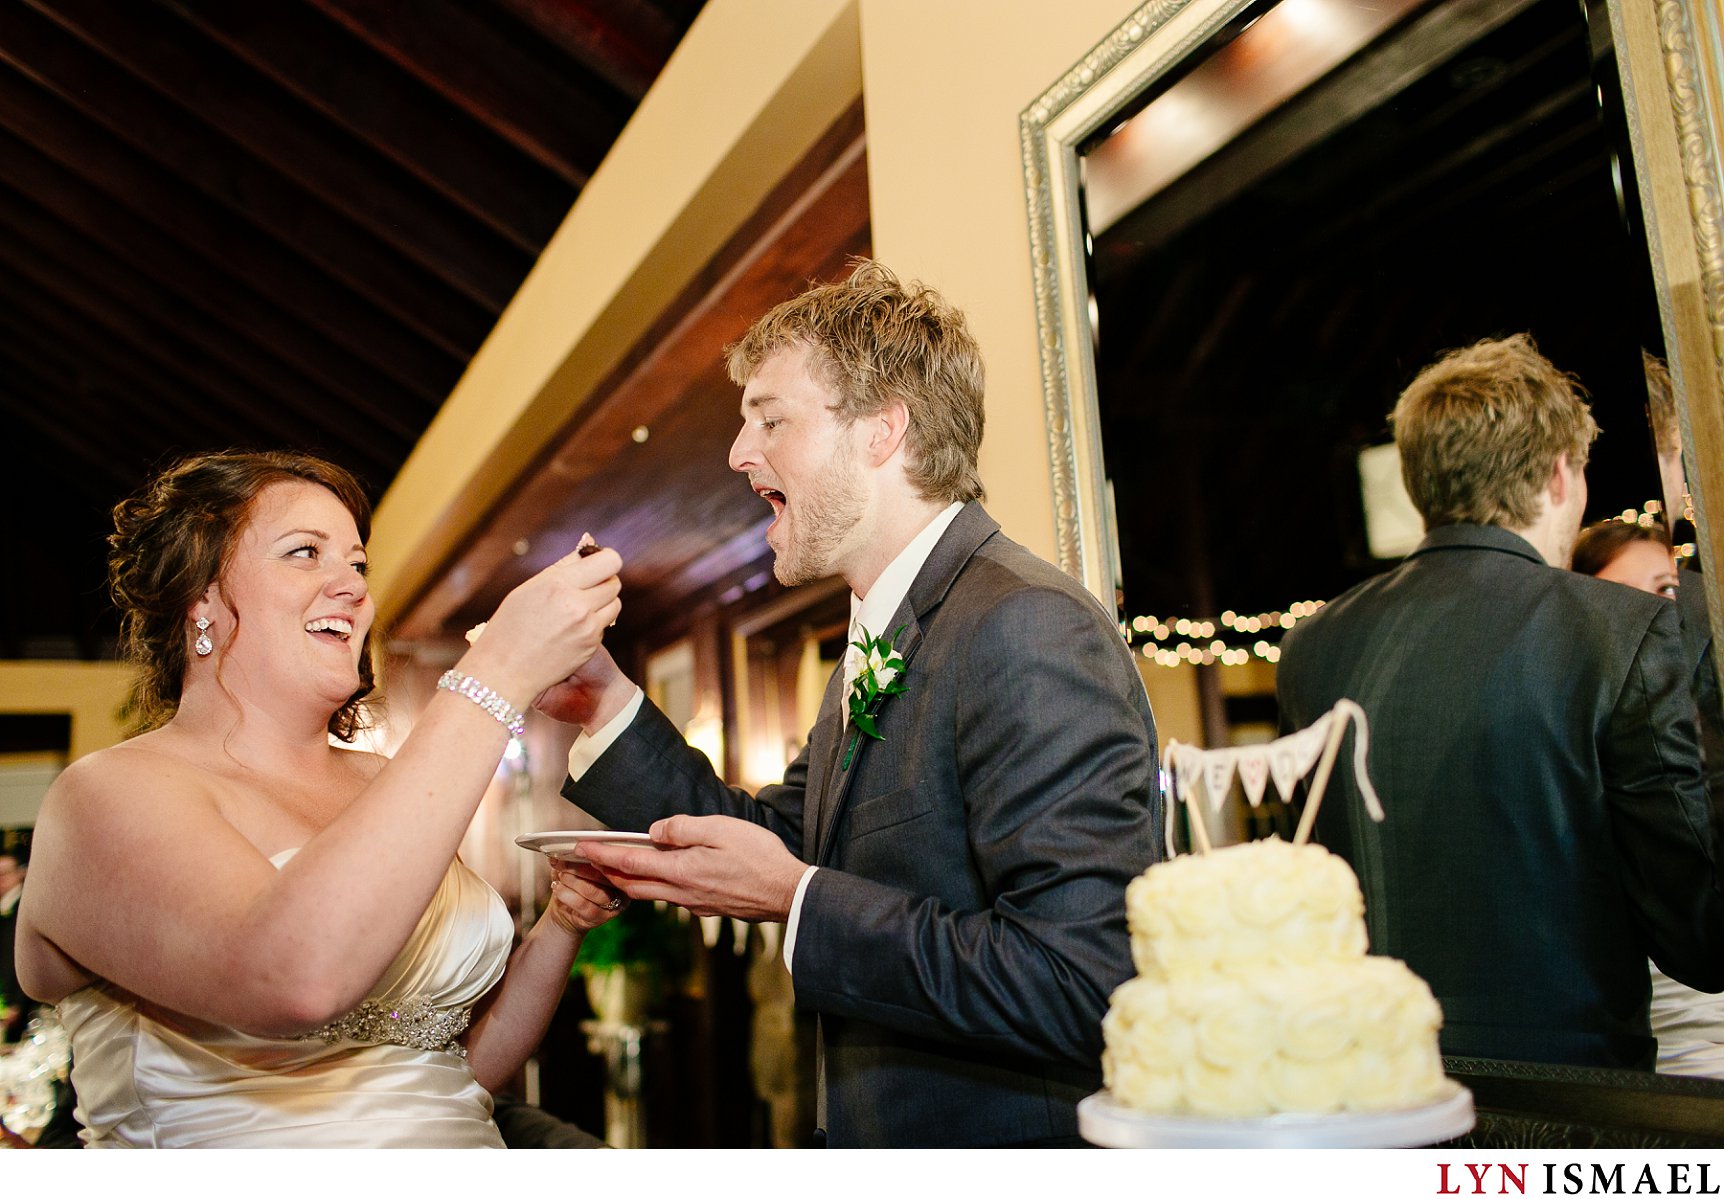 The bride and groom eats their cake.